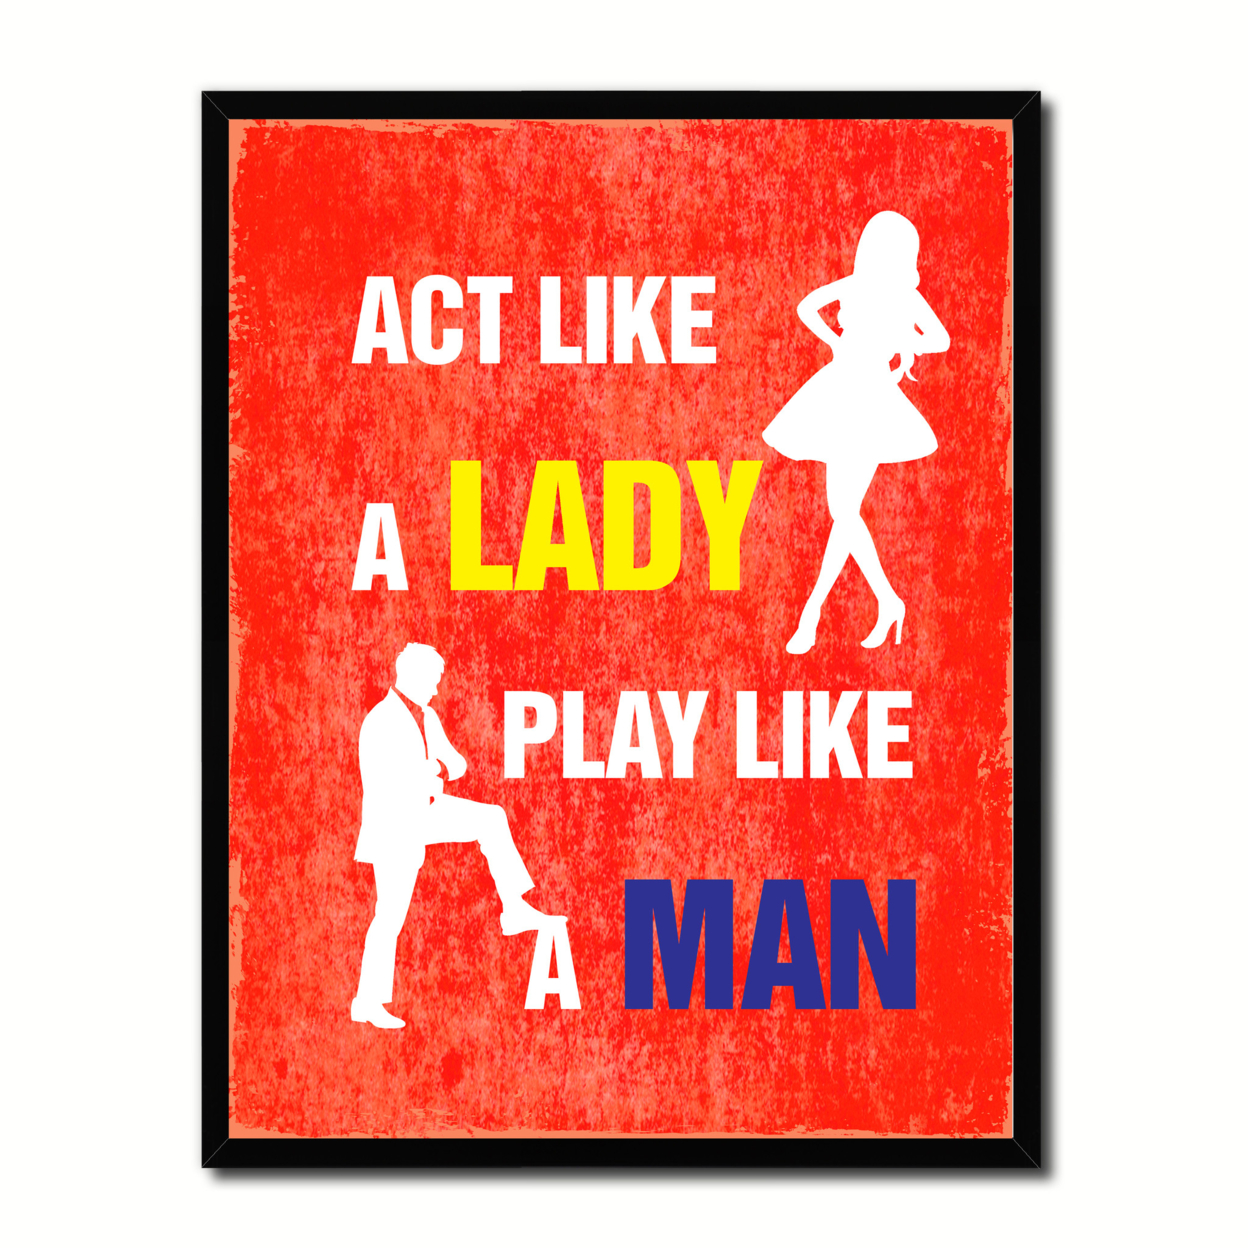 Act Like A Lady Play Like A Man Funny Typo Sign 17006 Picture Frame Gifts Home Decor Wall Art Canvas Print - 22"x29"